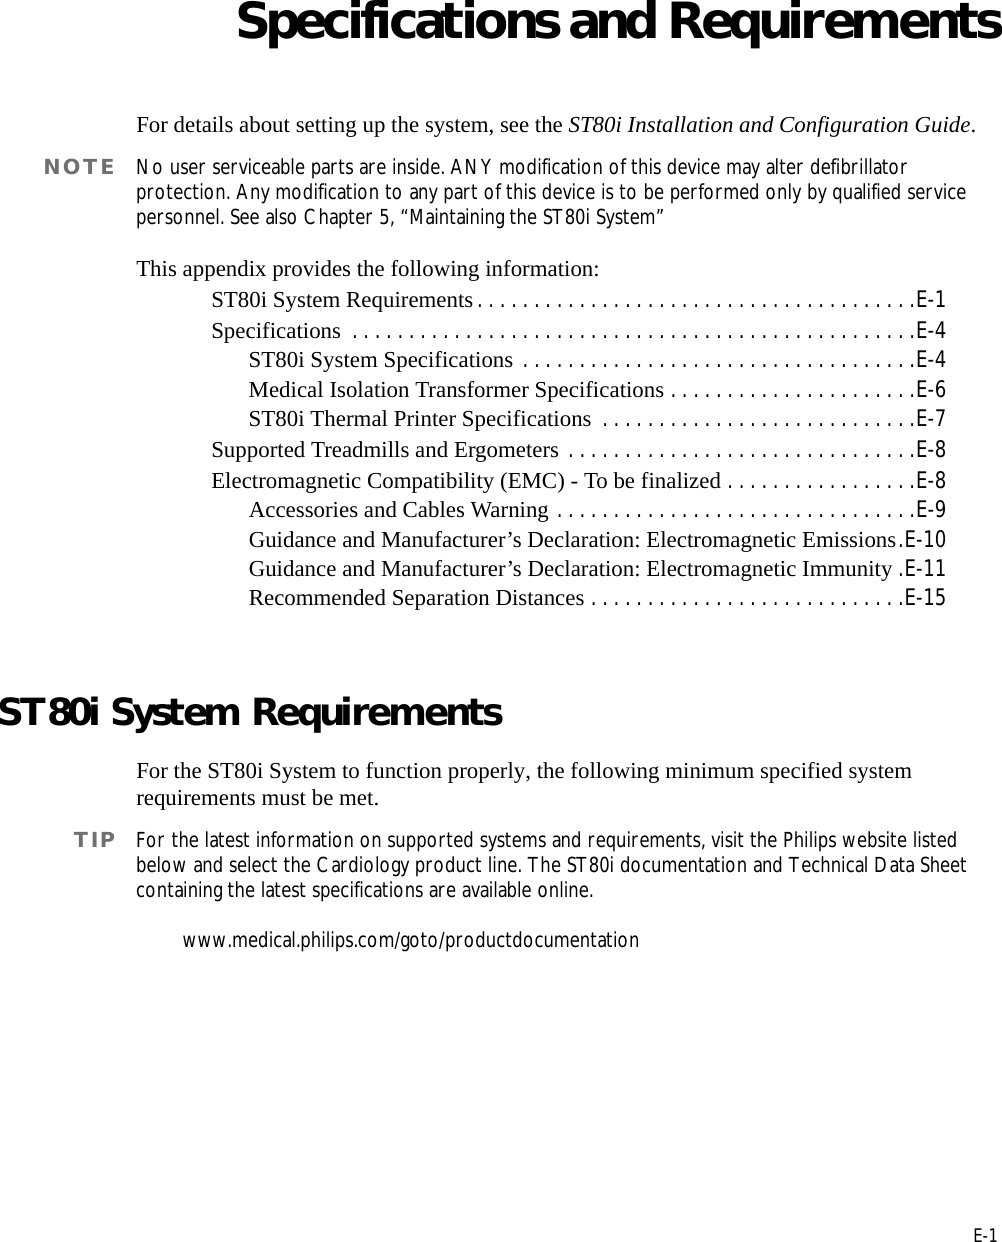 EE-1Appendix ASpecifications and RequirementsFor details about setting up the system, see the ST80i Installation and Configuration Guide.NOTE No user serviceable parts are inside. ANY modification of this device may alter defibrillator protection. Any modification to any part of this device is to be performed only by qualified service personnel. See also Chapter 5, “Maintaining the ST80i System”This appendix provides the following information:ST80i System Requirements . . . . . . . . . . . . . . . . . . . . . . . . . . . . . . . . . . . . . . .E-1Specifications  . . . . . . . . . . . . . . . . . . . . . . . . . . . . . . . . . . . . . . . . . . . . . . . . . .E-4ST80i System Specifications . . . . . . . . . . . . . . . . . . . . . . . . . . . . . . . . . . .E-4Medical Isolation Transformer Specifications . . . . . . . . . . . . . . . . . . . . . .E-6ST80i Thermal Printer Specifications  . . . . . . . . . . . . . . . . . . . . . . . . . . . .E-7Supported Treadmills and Ergometers . . . . . . . . . . . . . . . . . . . . . . . . . . . . . . .E-8Electromagnetic Compatibility (EMC) - To be finalized . . . . . . . . . . . . . . . . .E-8Accessories and Cables Warning . . . . . . . . . . . . . . . . . . . . . . . . . . . . . . . .E-9Guidance and Manufacturer’s Declaration: Electromagnetic Emissions.E-10Guidance and Manufacturer’s Declaration: Electromagnetic Immunity .E-11Recommended Separation Distances . . . . . . . . . . . . . . . . . . . . . . . . . . . .E-15ST80i System Requirements For the ST80i System to function properly, the following minimum specified system requirements must be met. TIP For the latest information on supported systems and requirements, visit the Philips website listed below and select the Cardiology product line. The ST80i documentation and Technical Data Sheet containing the latest specifications are available online. www.medical.philips.com/goto/productdocumentation 